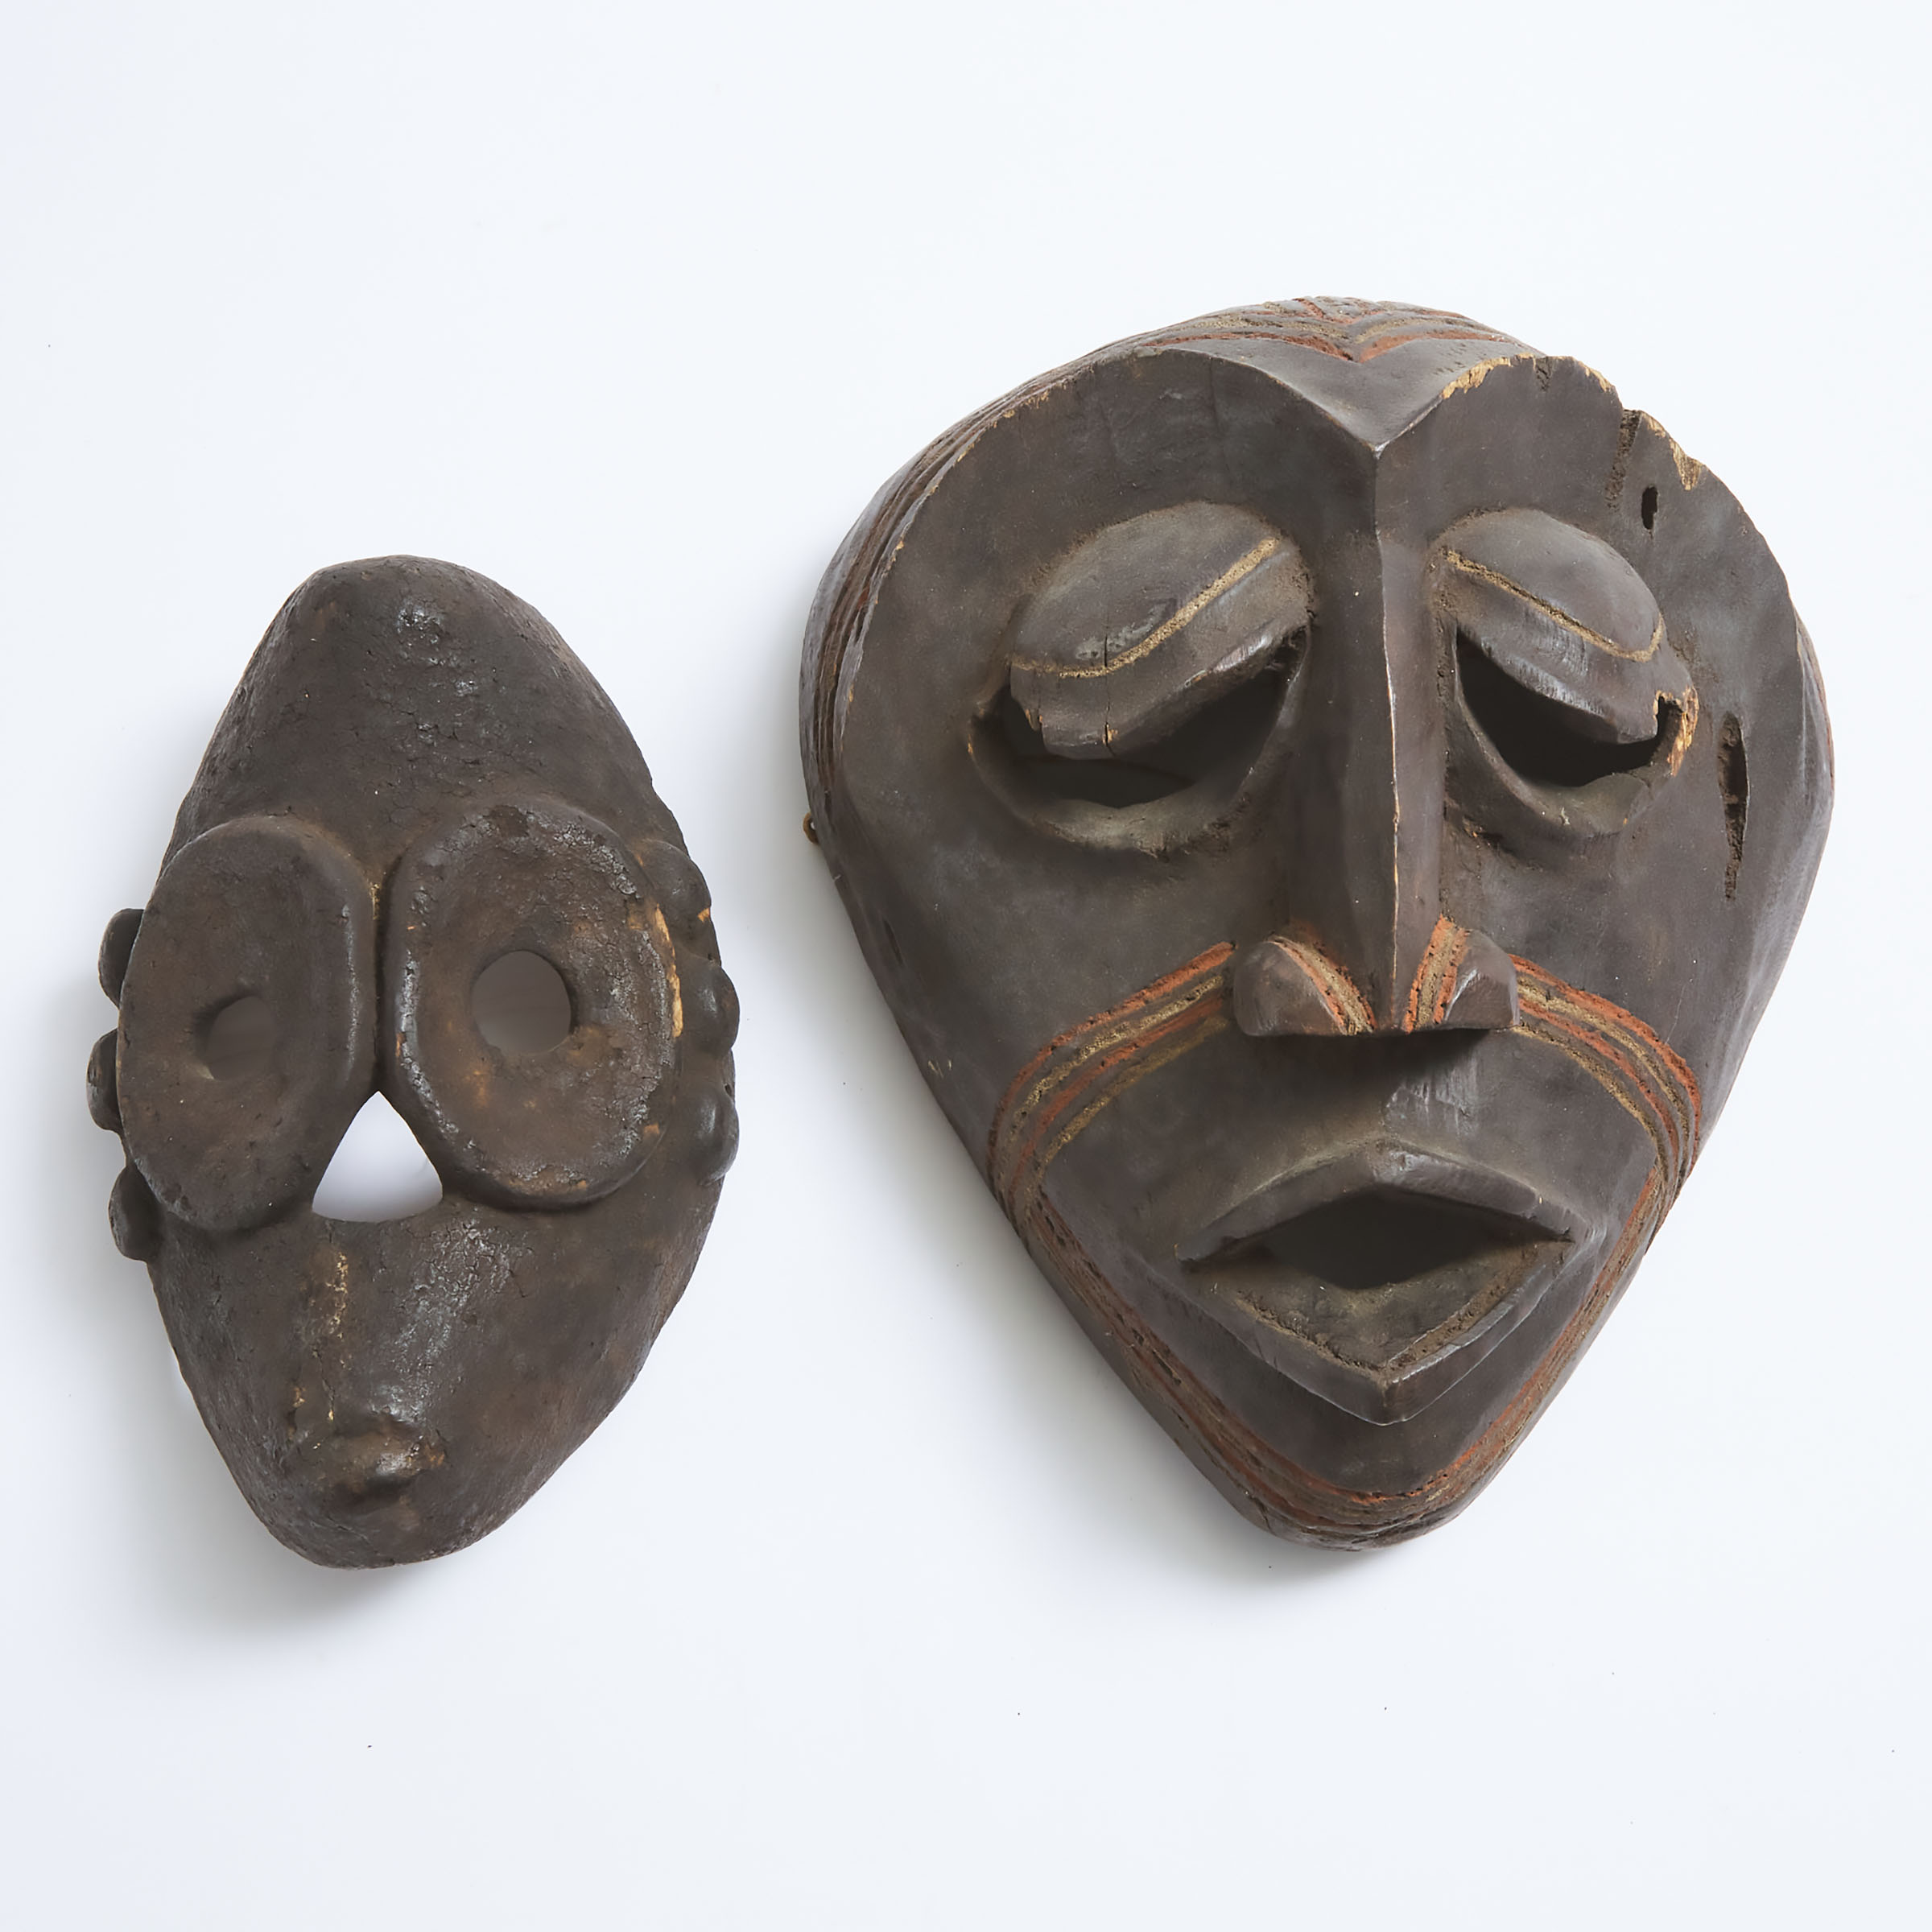 Unidentified African Mask, possibly